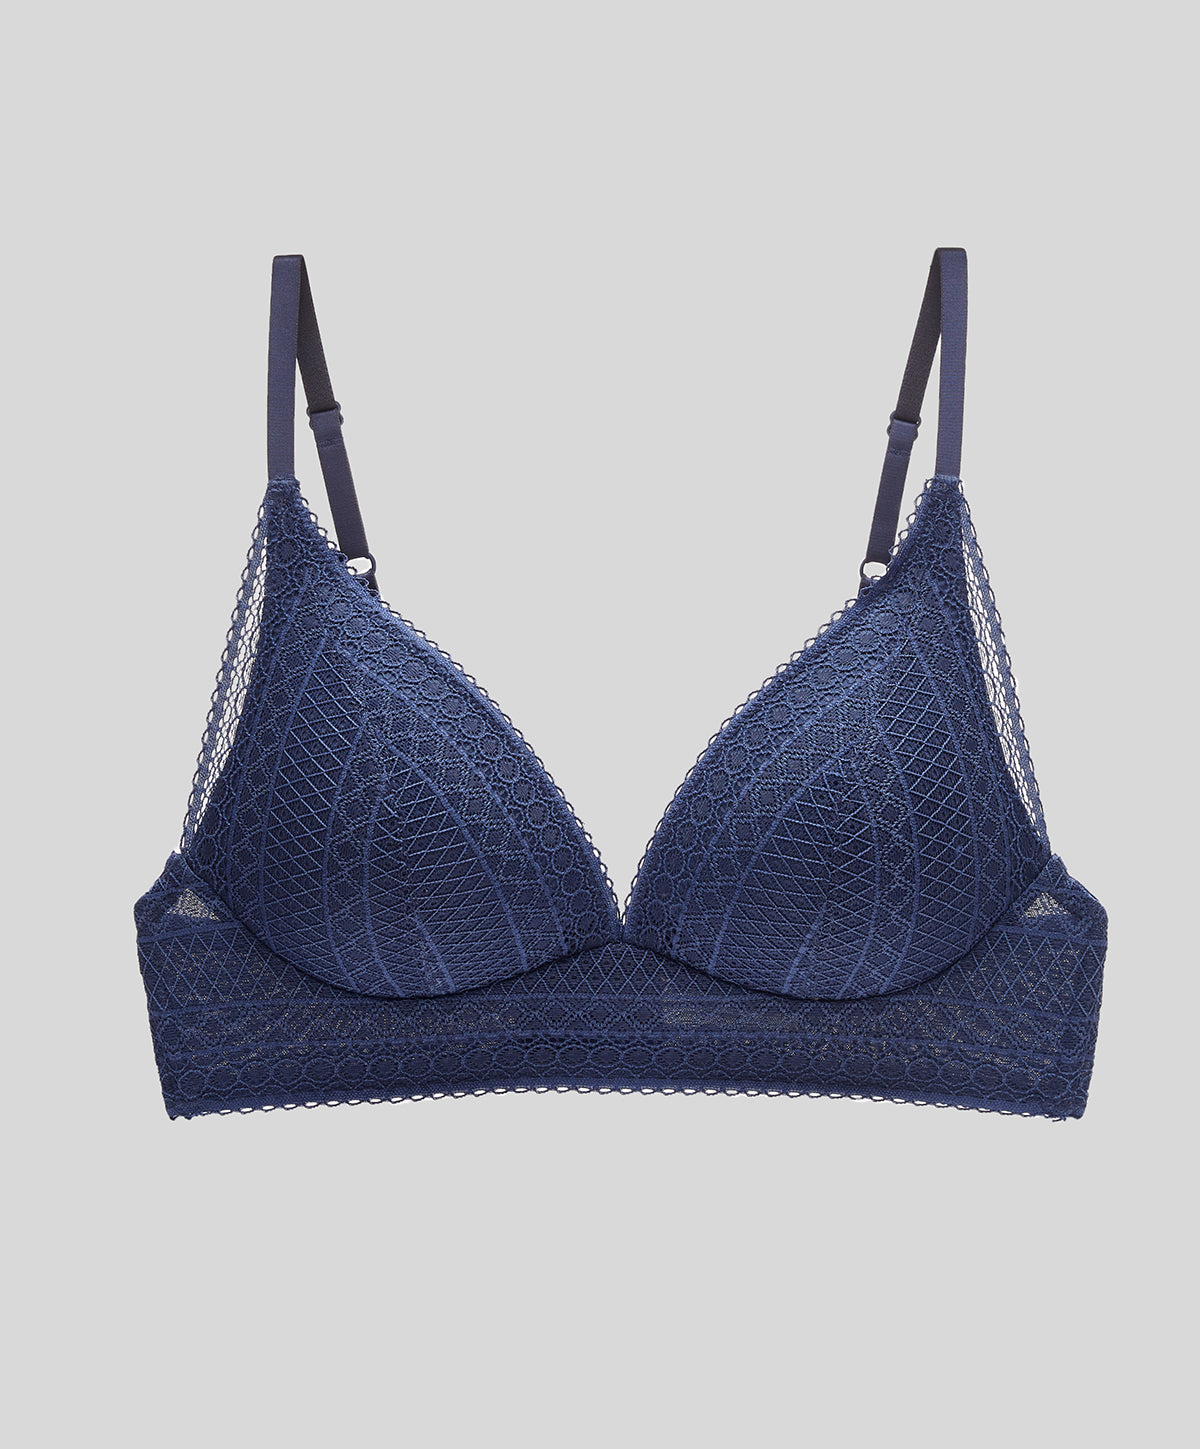 Looking for better and - Pierre Cardin Lingerie Malaysia